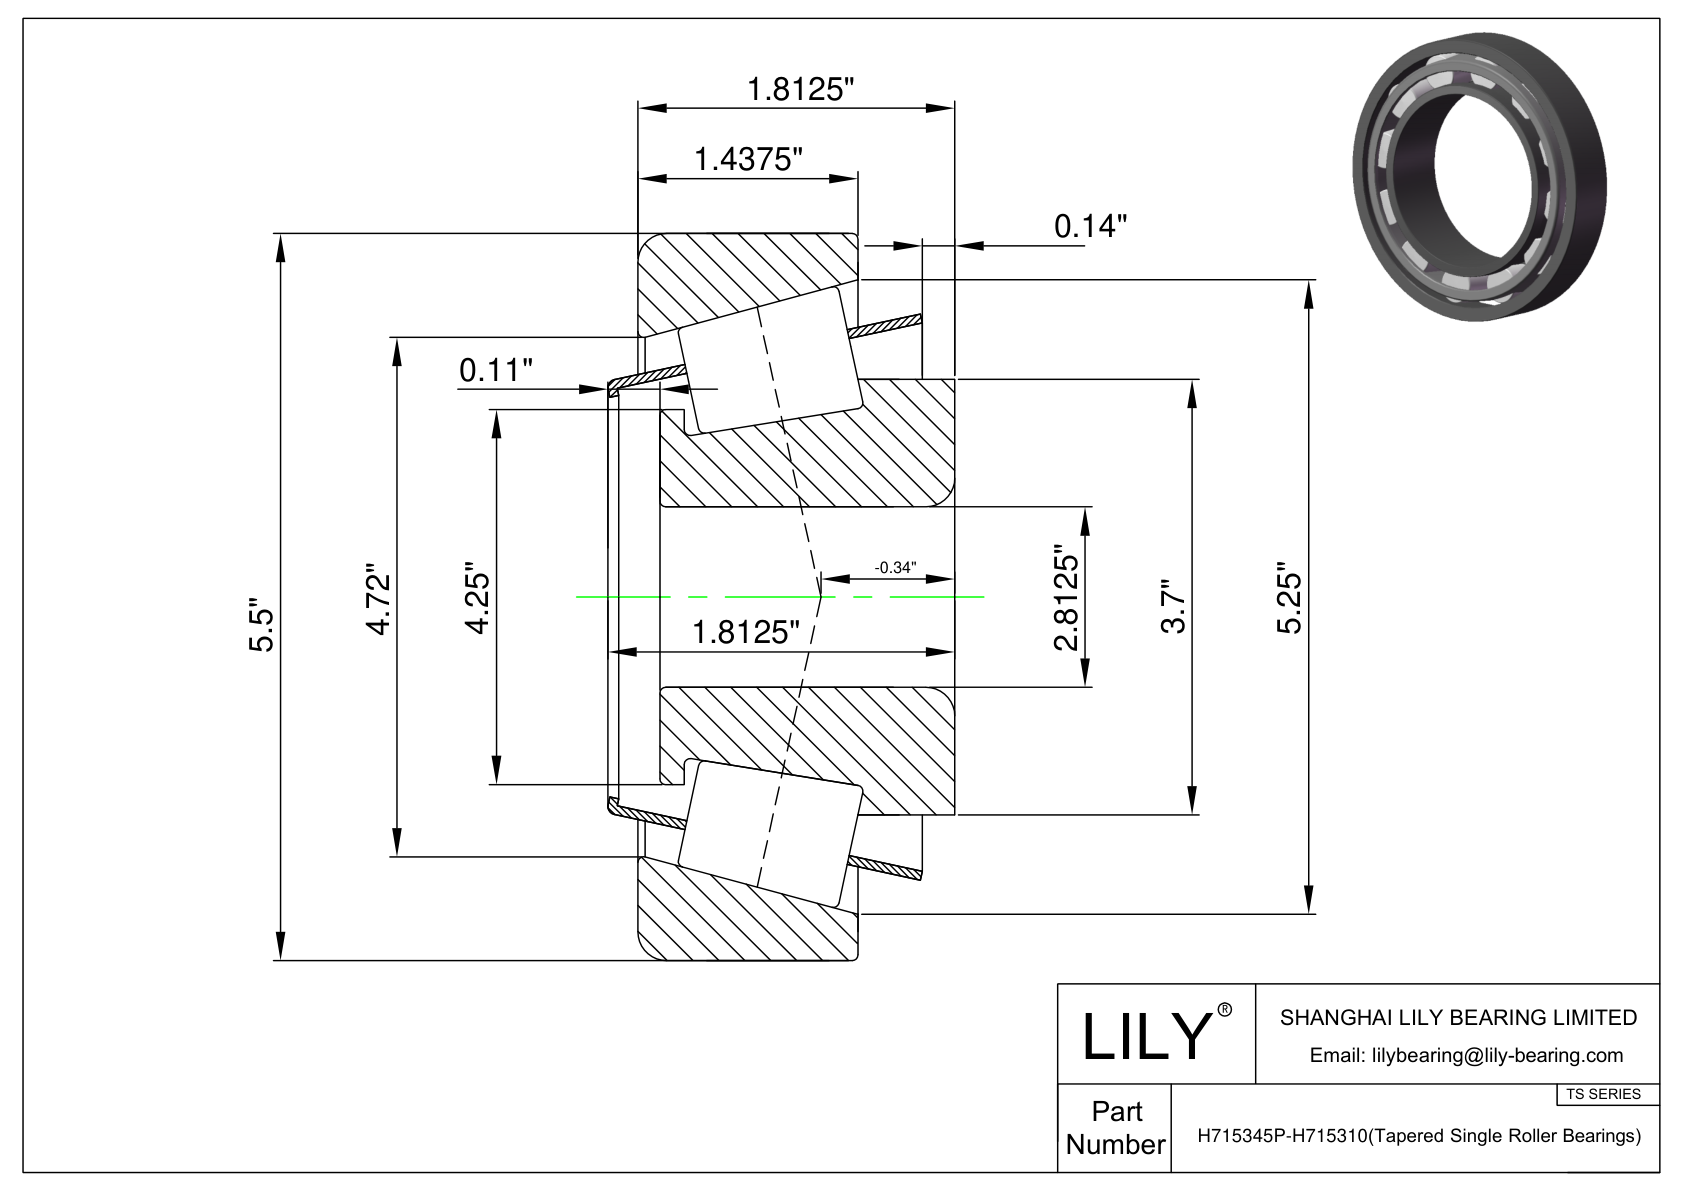 H715345P-H715310 TS (Tapered Single Roller Bearings) (Imperial) cad drawing